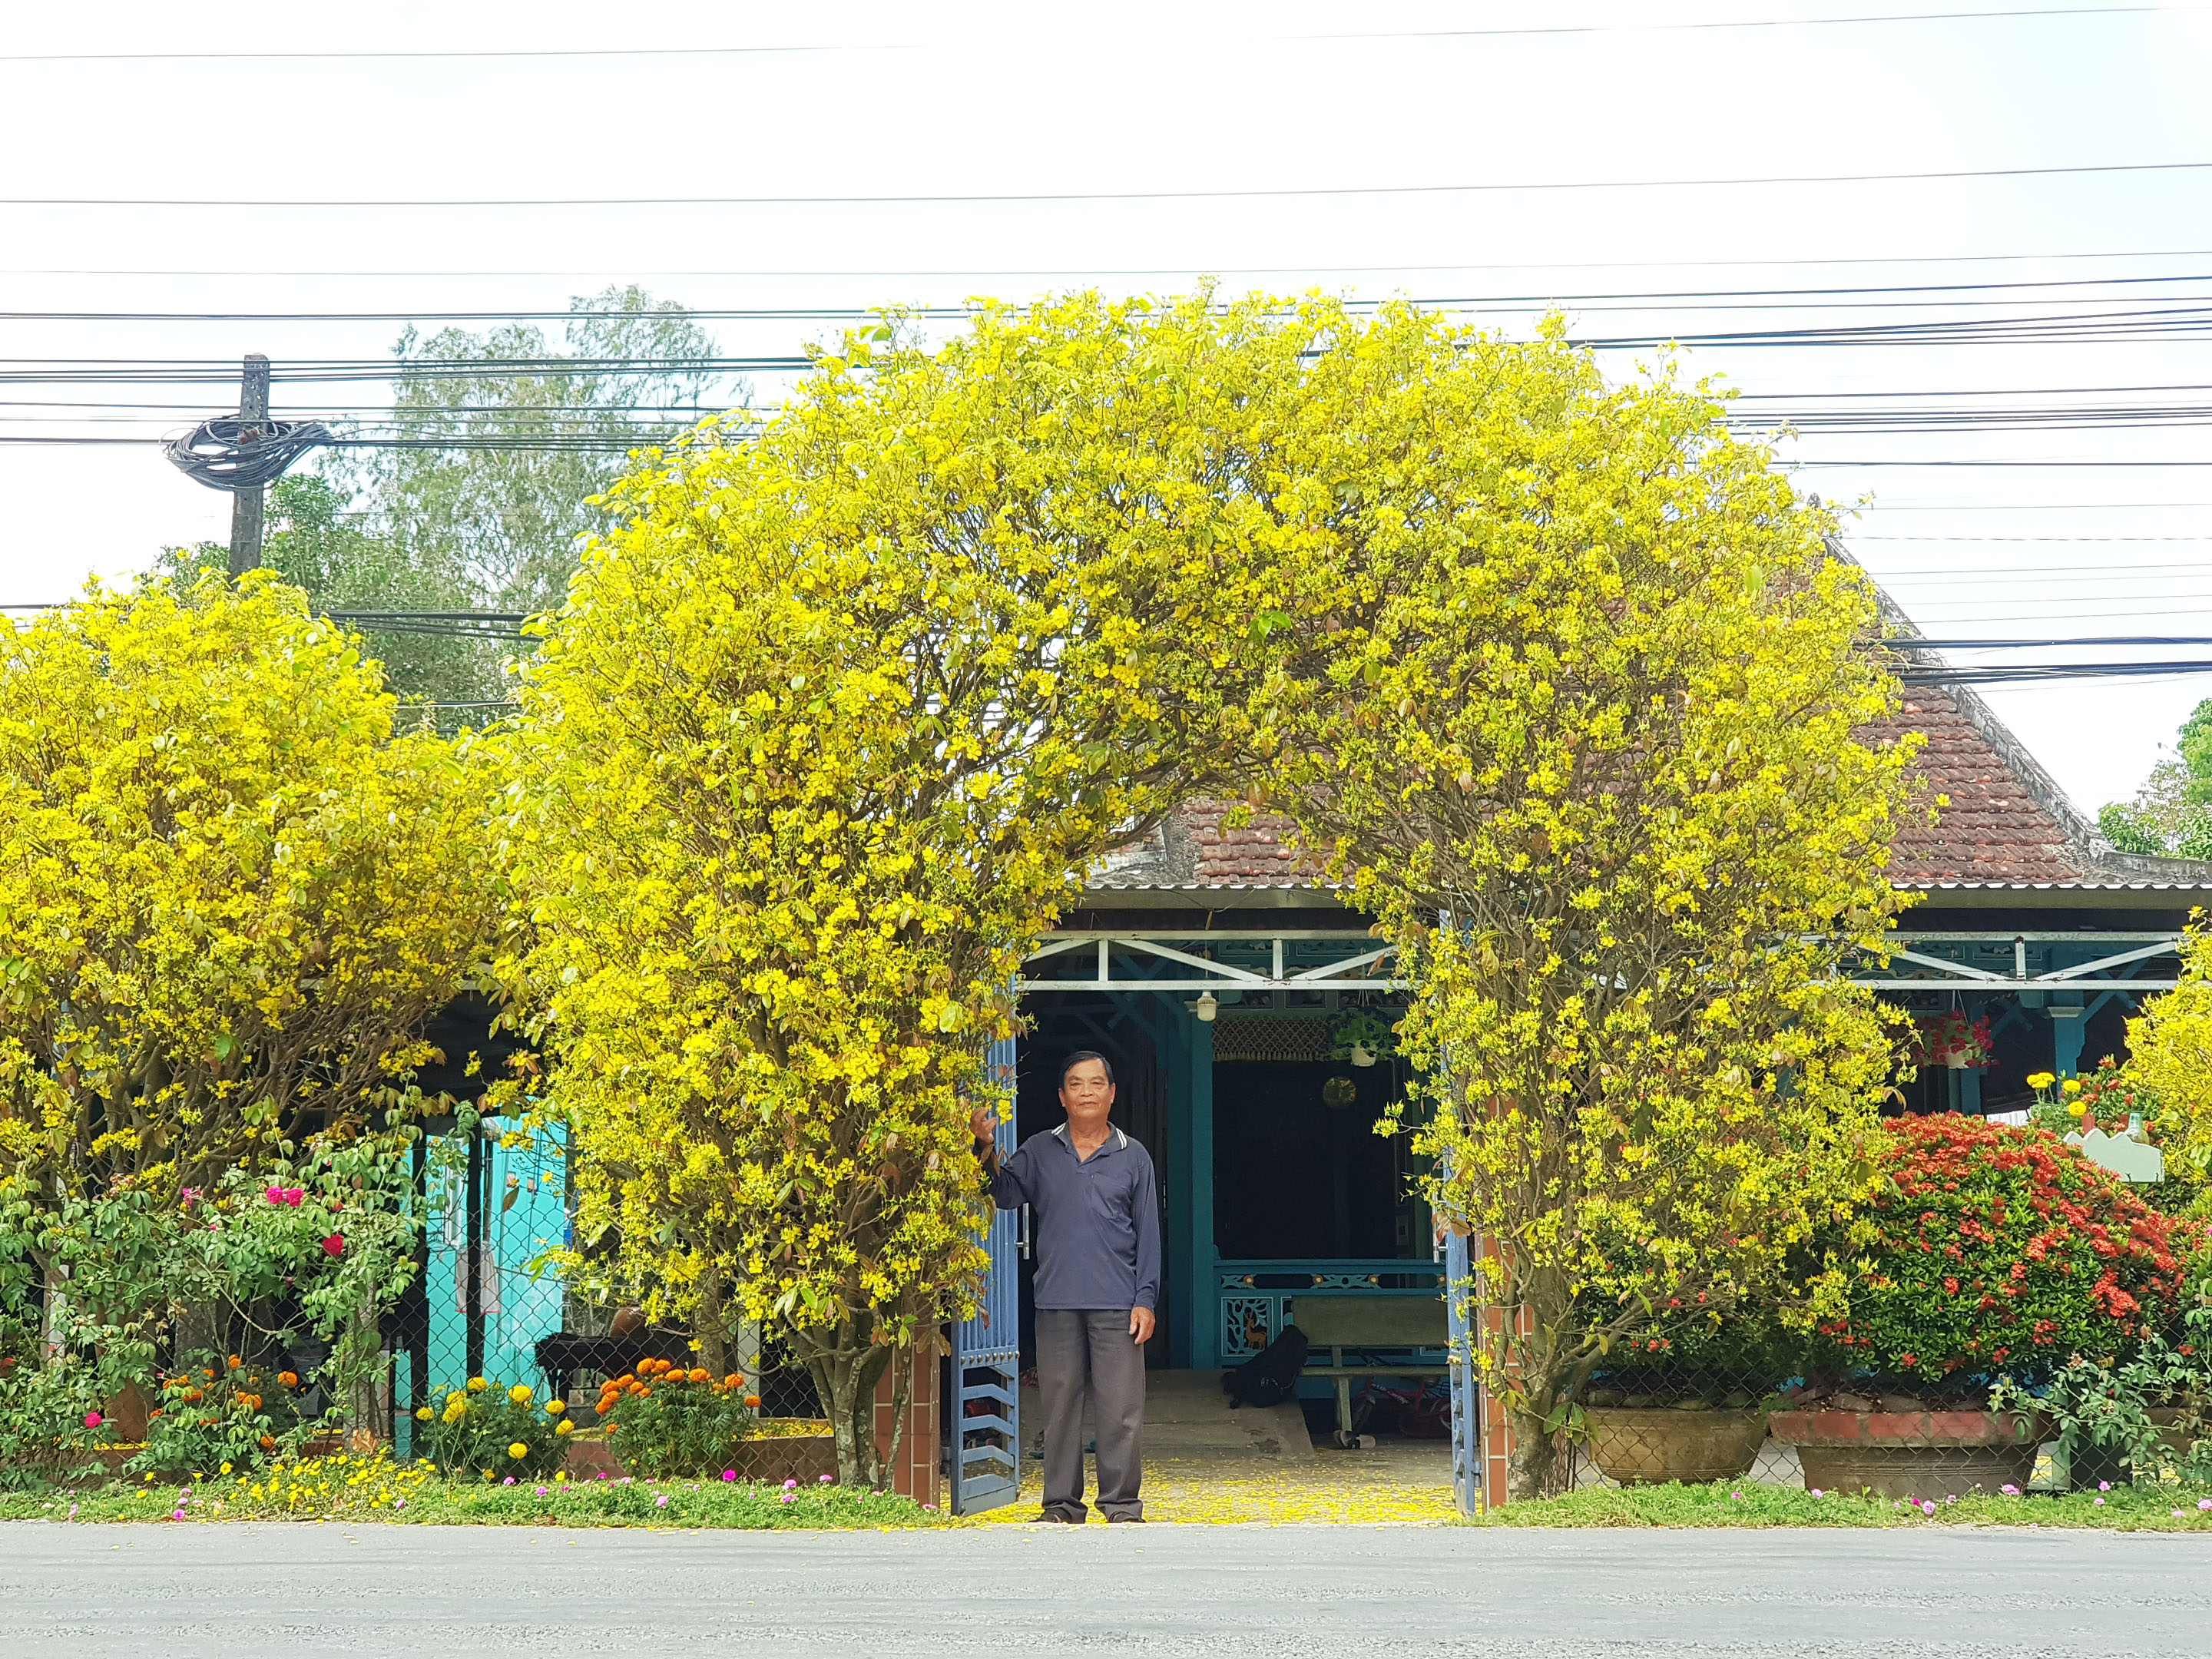 Vo Van Banh poses for a photo with his four-meter-high gate grown from two yellow apricot blossom trees in the Mekong Delta province of An Giang’s Thoai Son District on February 3, 2022. Photo: Ngoc Khai / Tuoi Tre